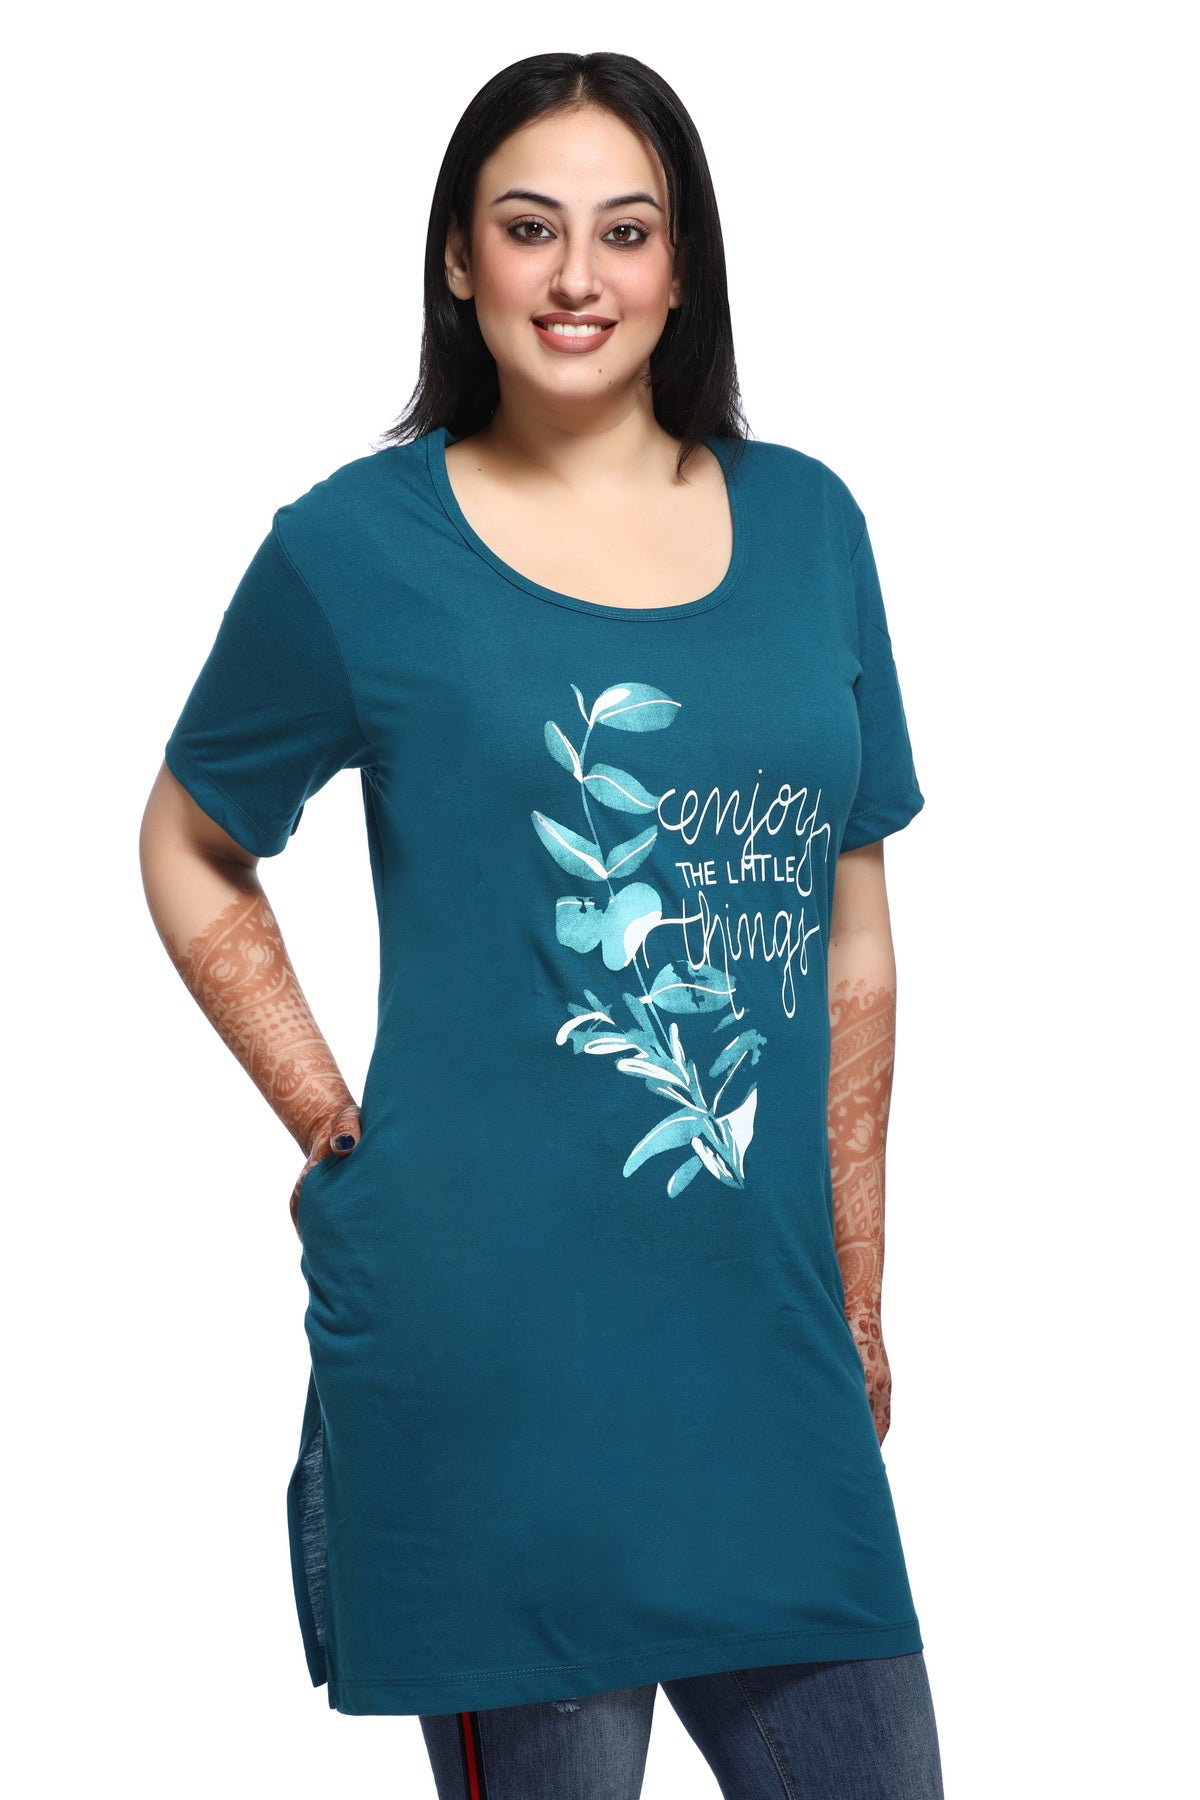 Plus Size Long T-shirts For Women - Half Sleeve - Pack of 2 (Teal Blue & Blush Pink)